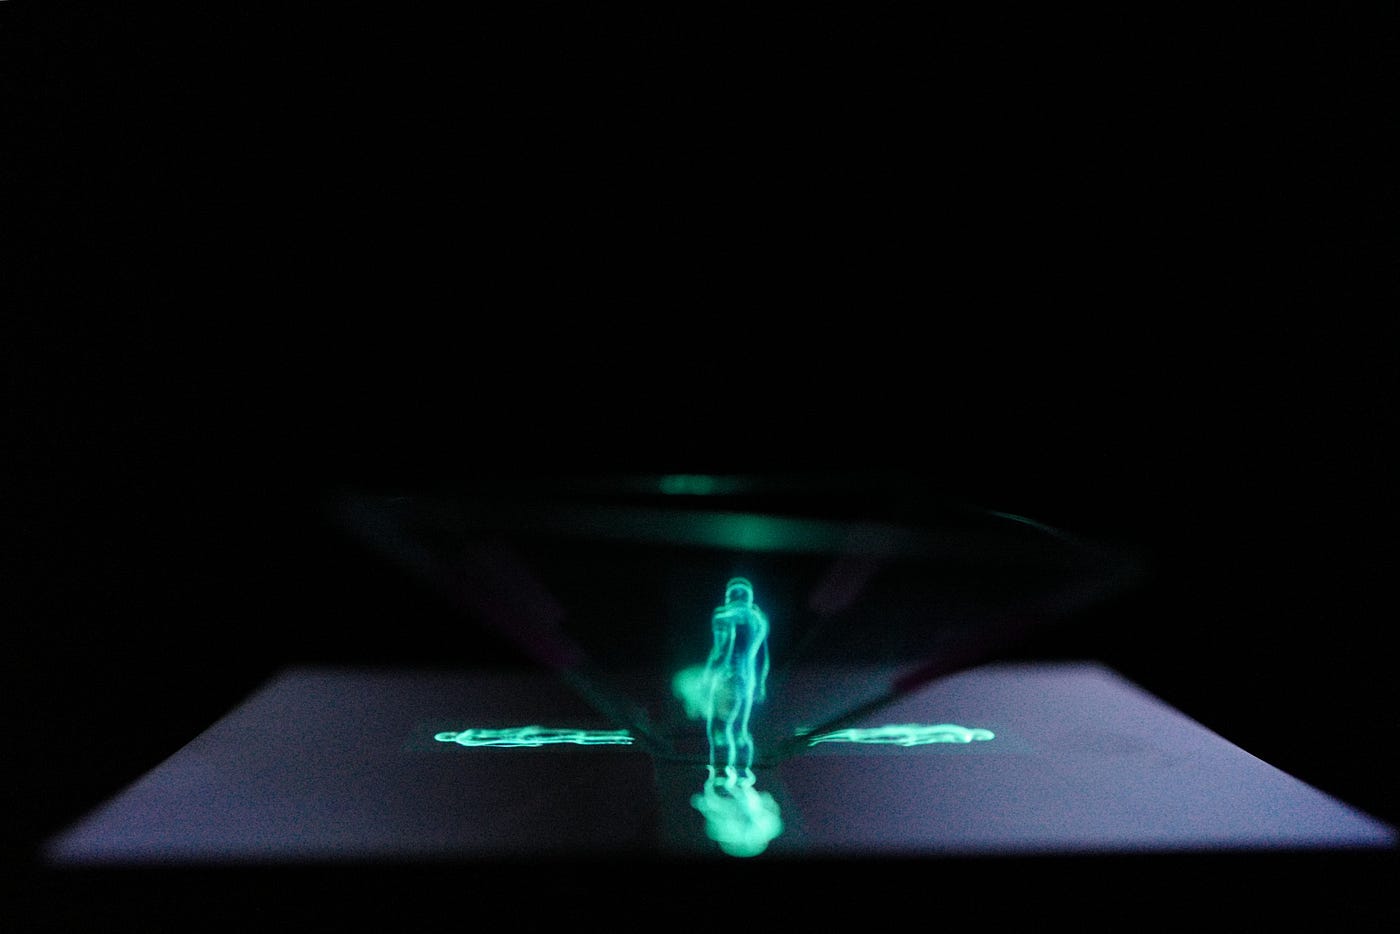 How to turn your smartphone into a 3D hologram projector, by Flo Meissner